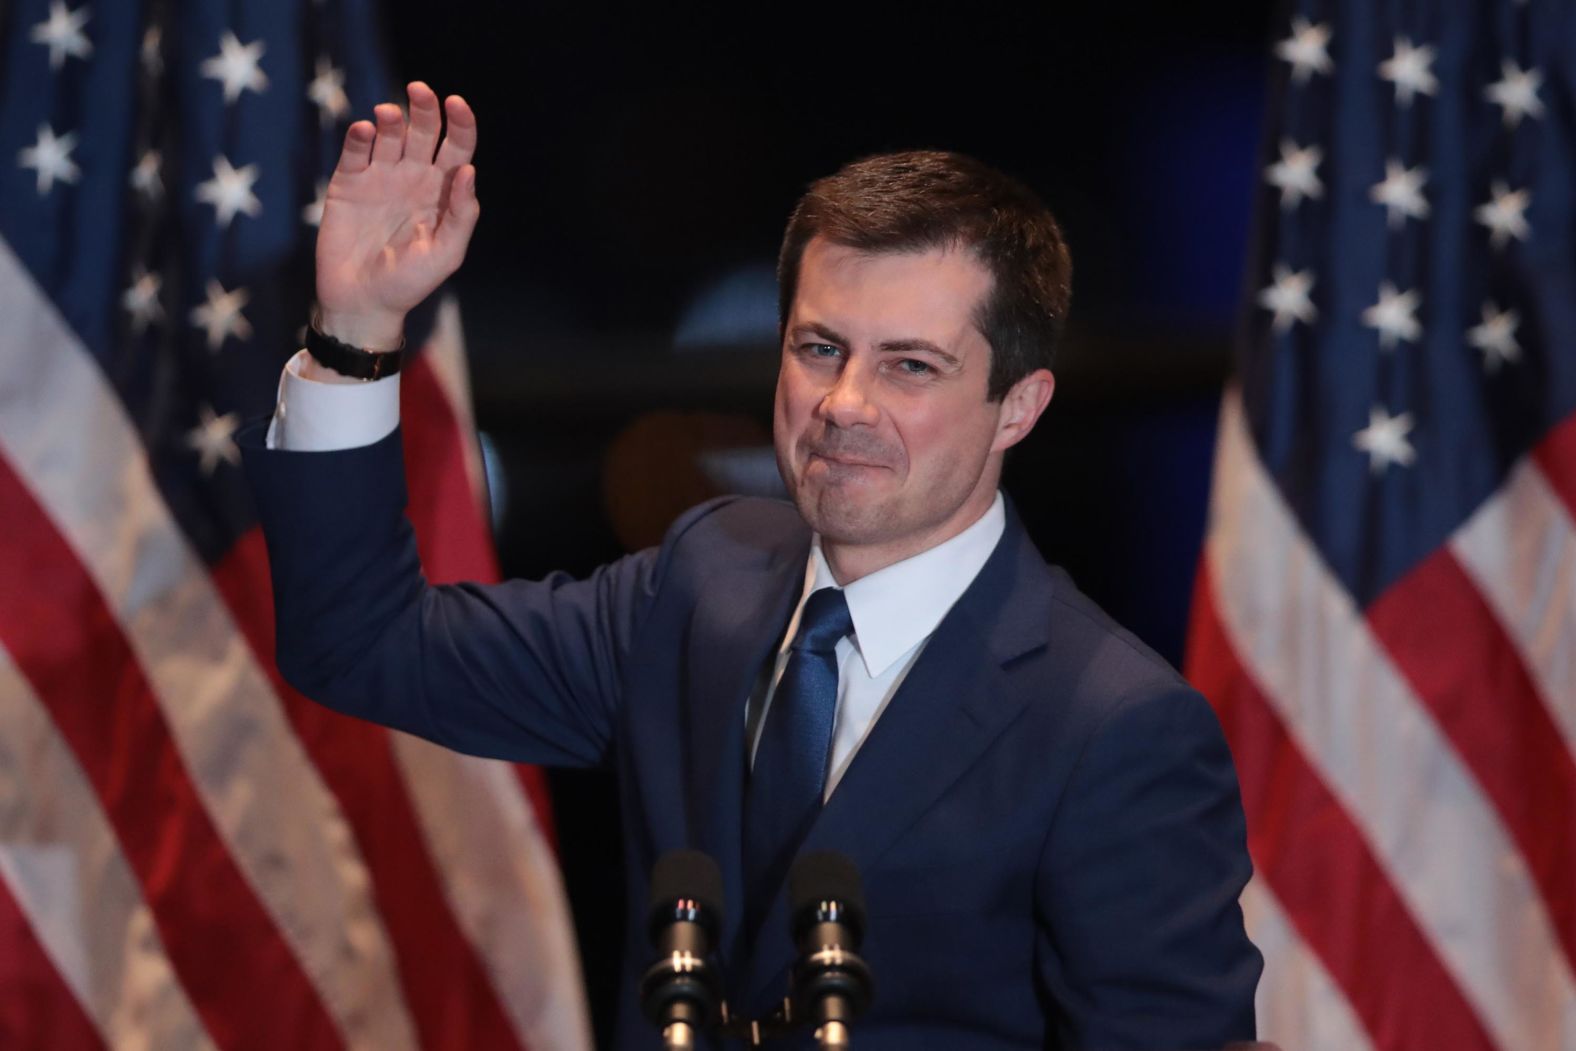 Buttigieg announced <a href="index.php?page=&url=https%3A%2F%2Fwww.cnn.com%2F2020%2F03%2F01%2Fpolitics%2Fbuttigieg-campaign%2Findex.html" target="_blank">the end of his campaign</a> during a speech on Sunday. He won the Iowa caucuses in February.